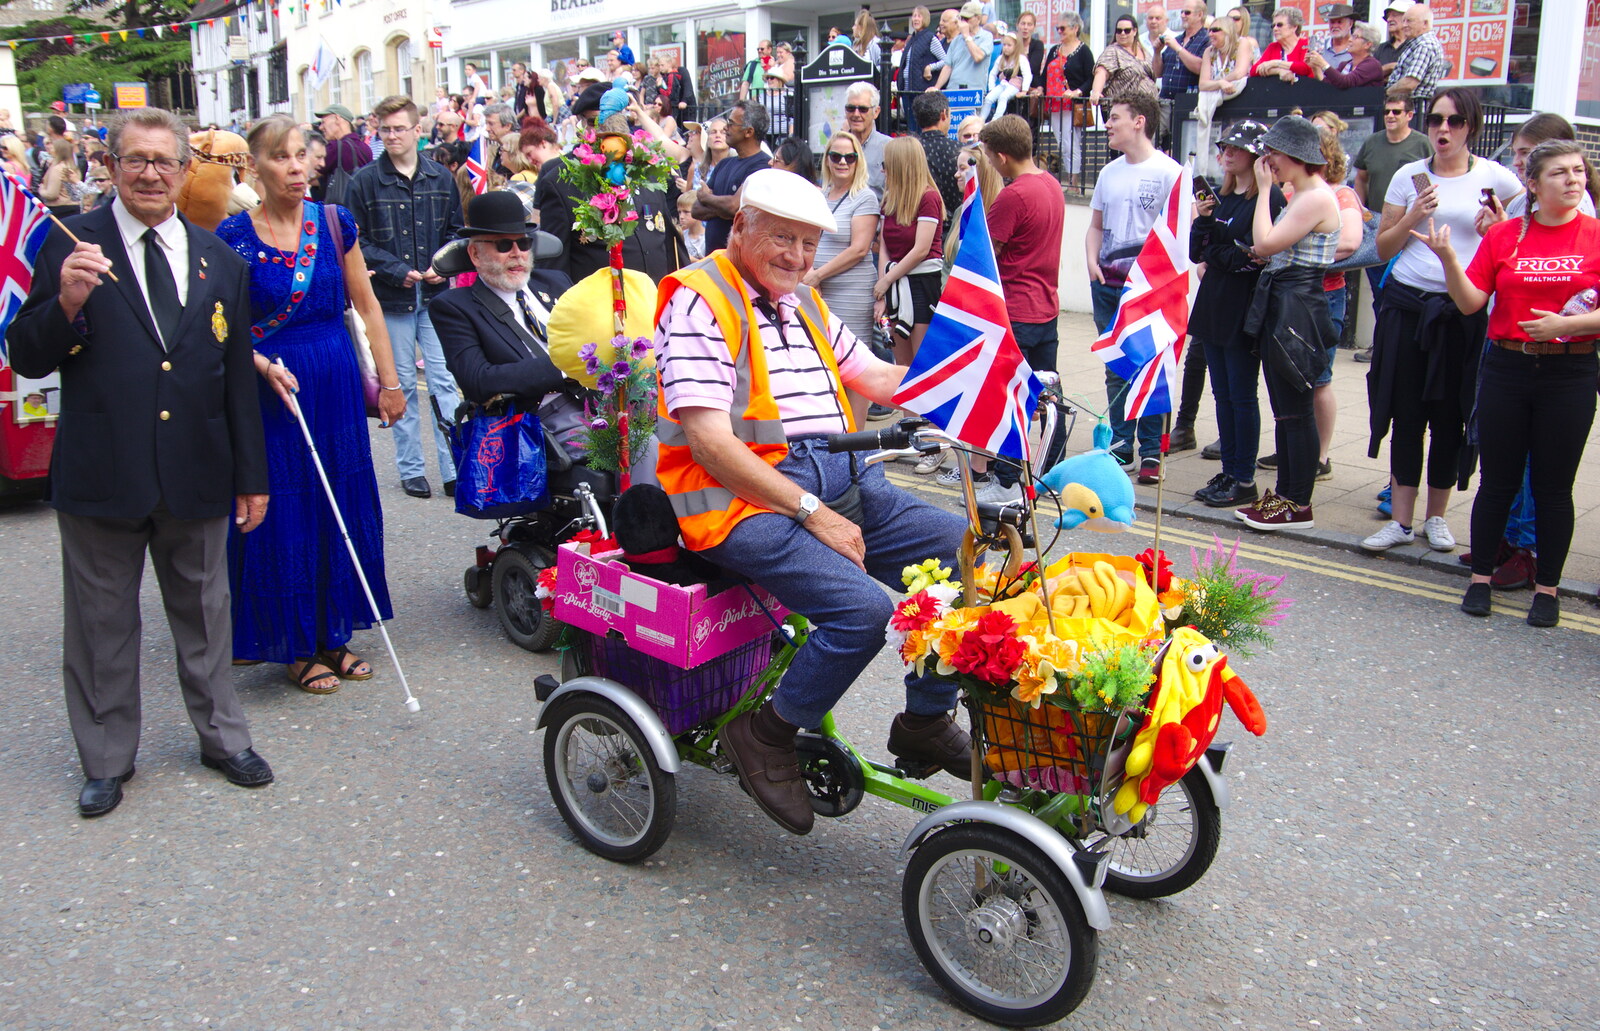 The dude on his flowery bicycle from The Diss Carnival 2019, Diss, Norfolk - 9th June 2019